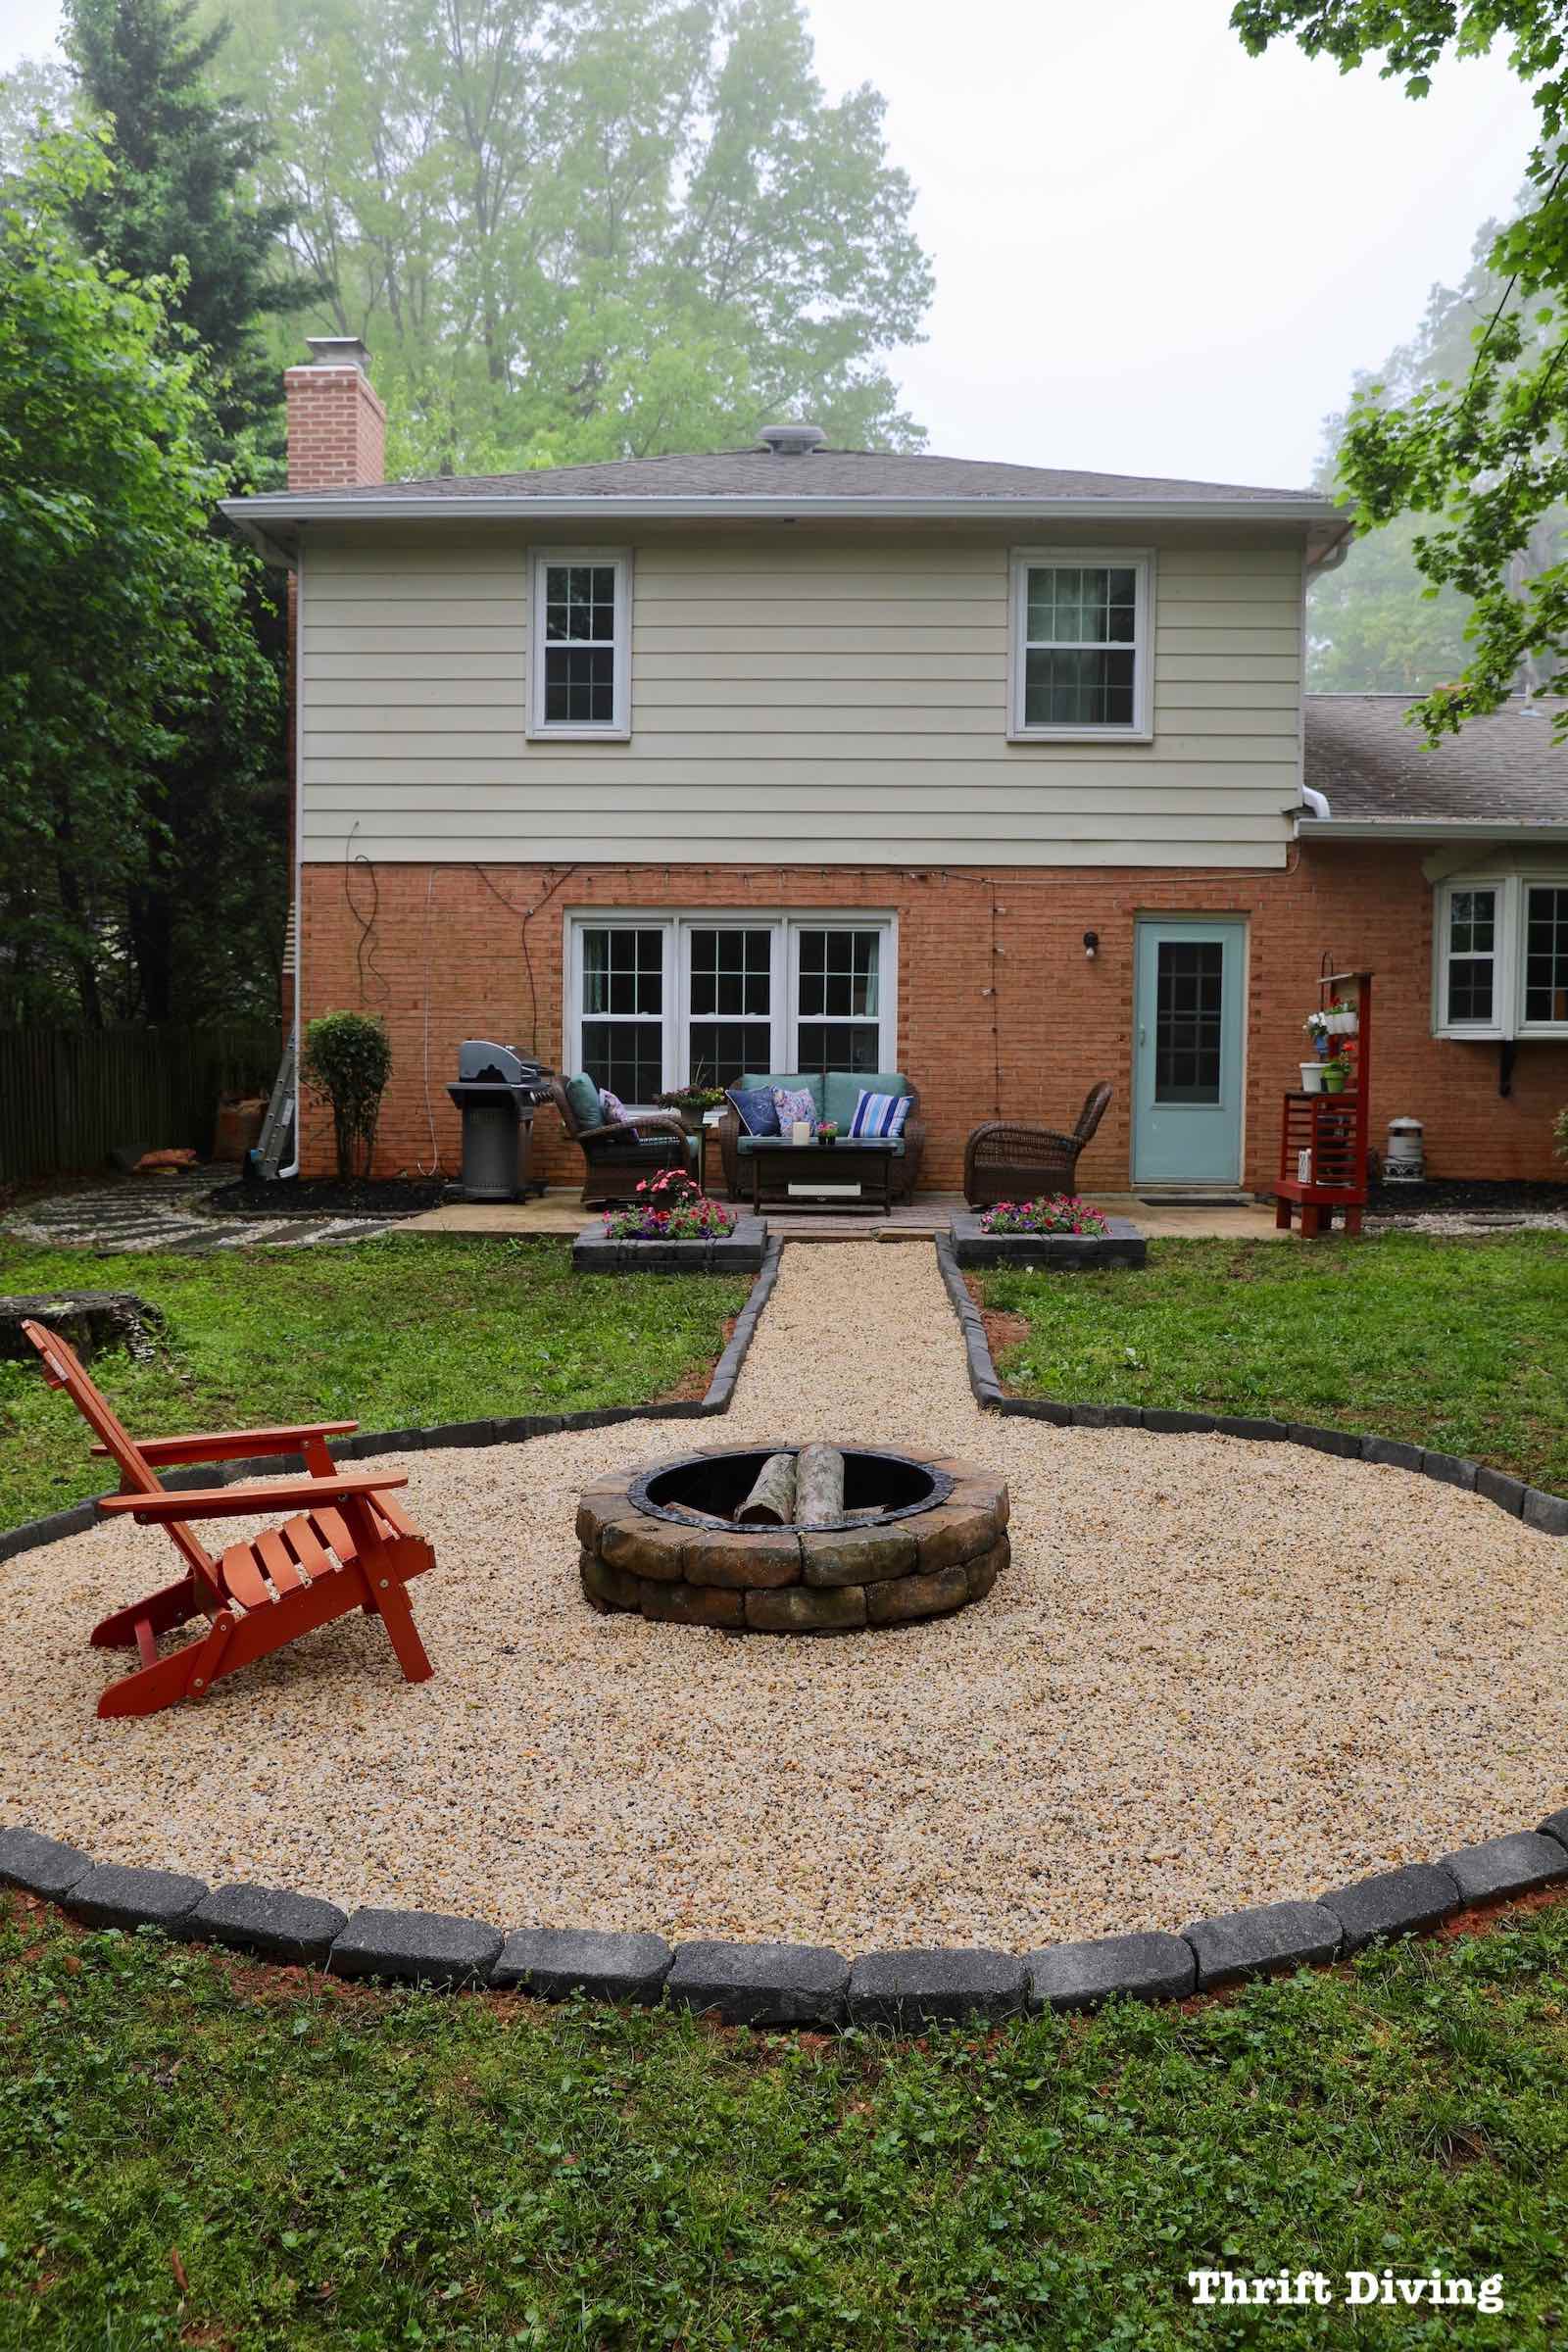 Outdoor Makeover - Creating a DIY Outdoor Makeover - DIY fire pit seating area in the backyard. - Thrift Diving